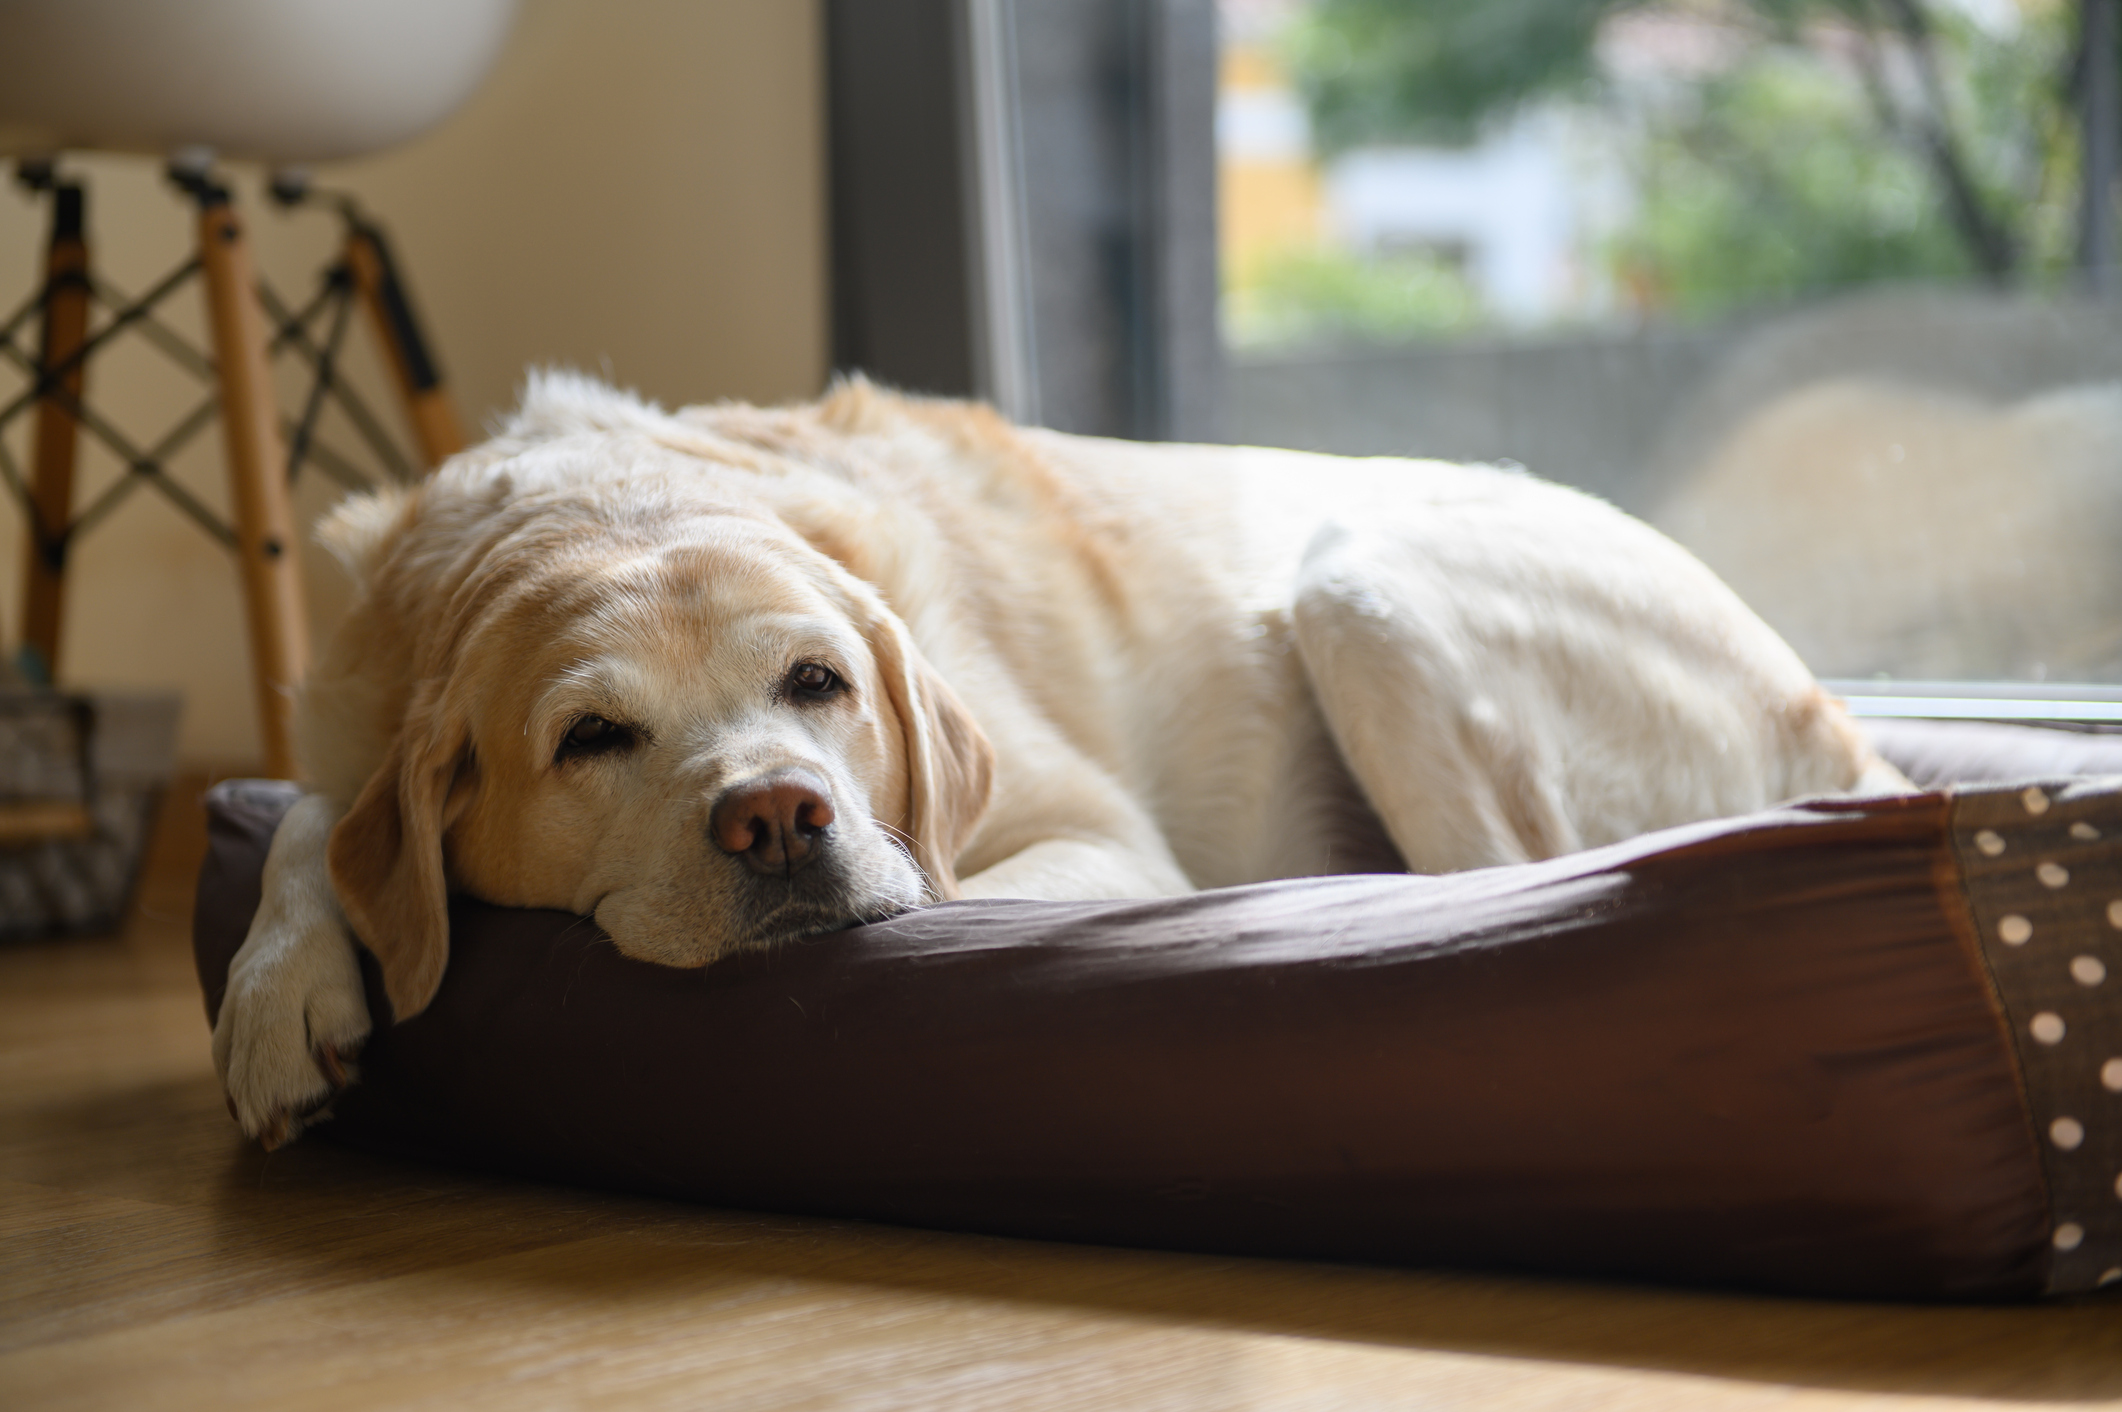 Yellow Labrador resting in dog bed